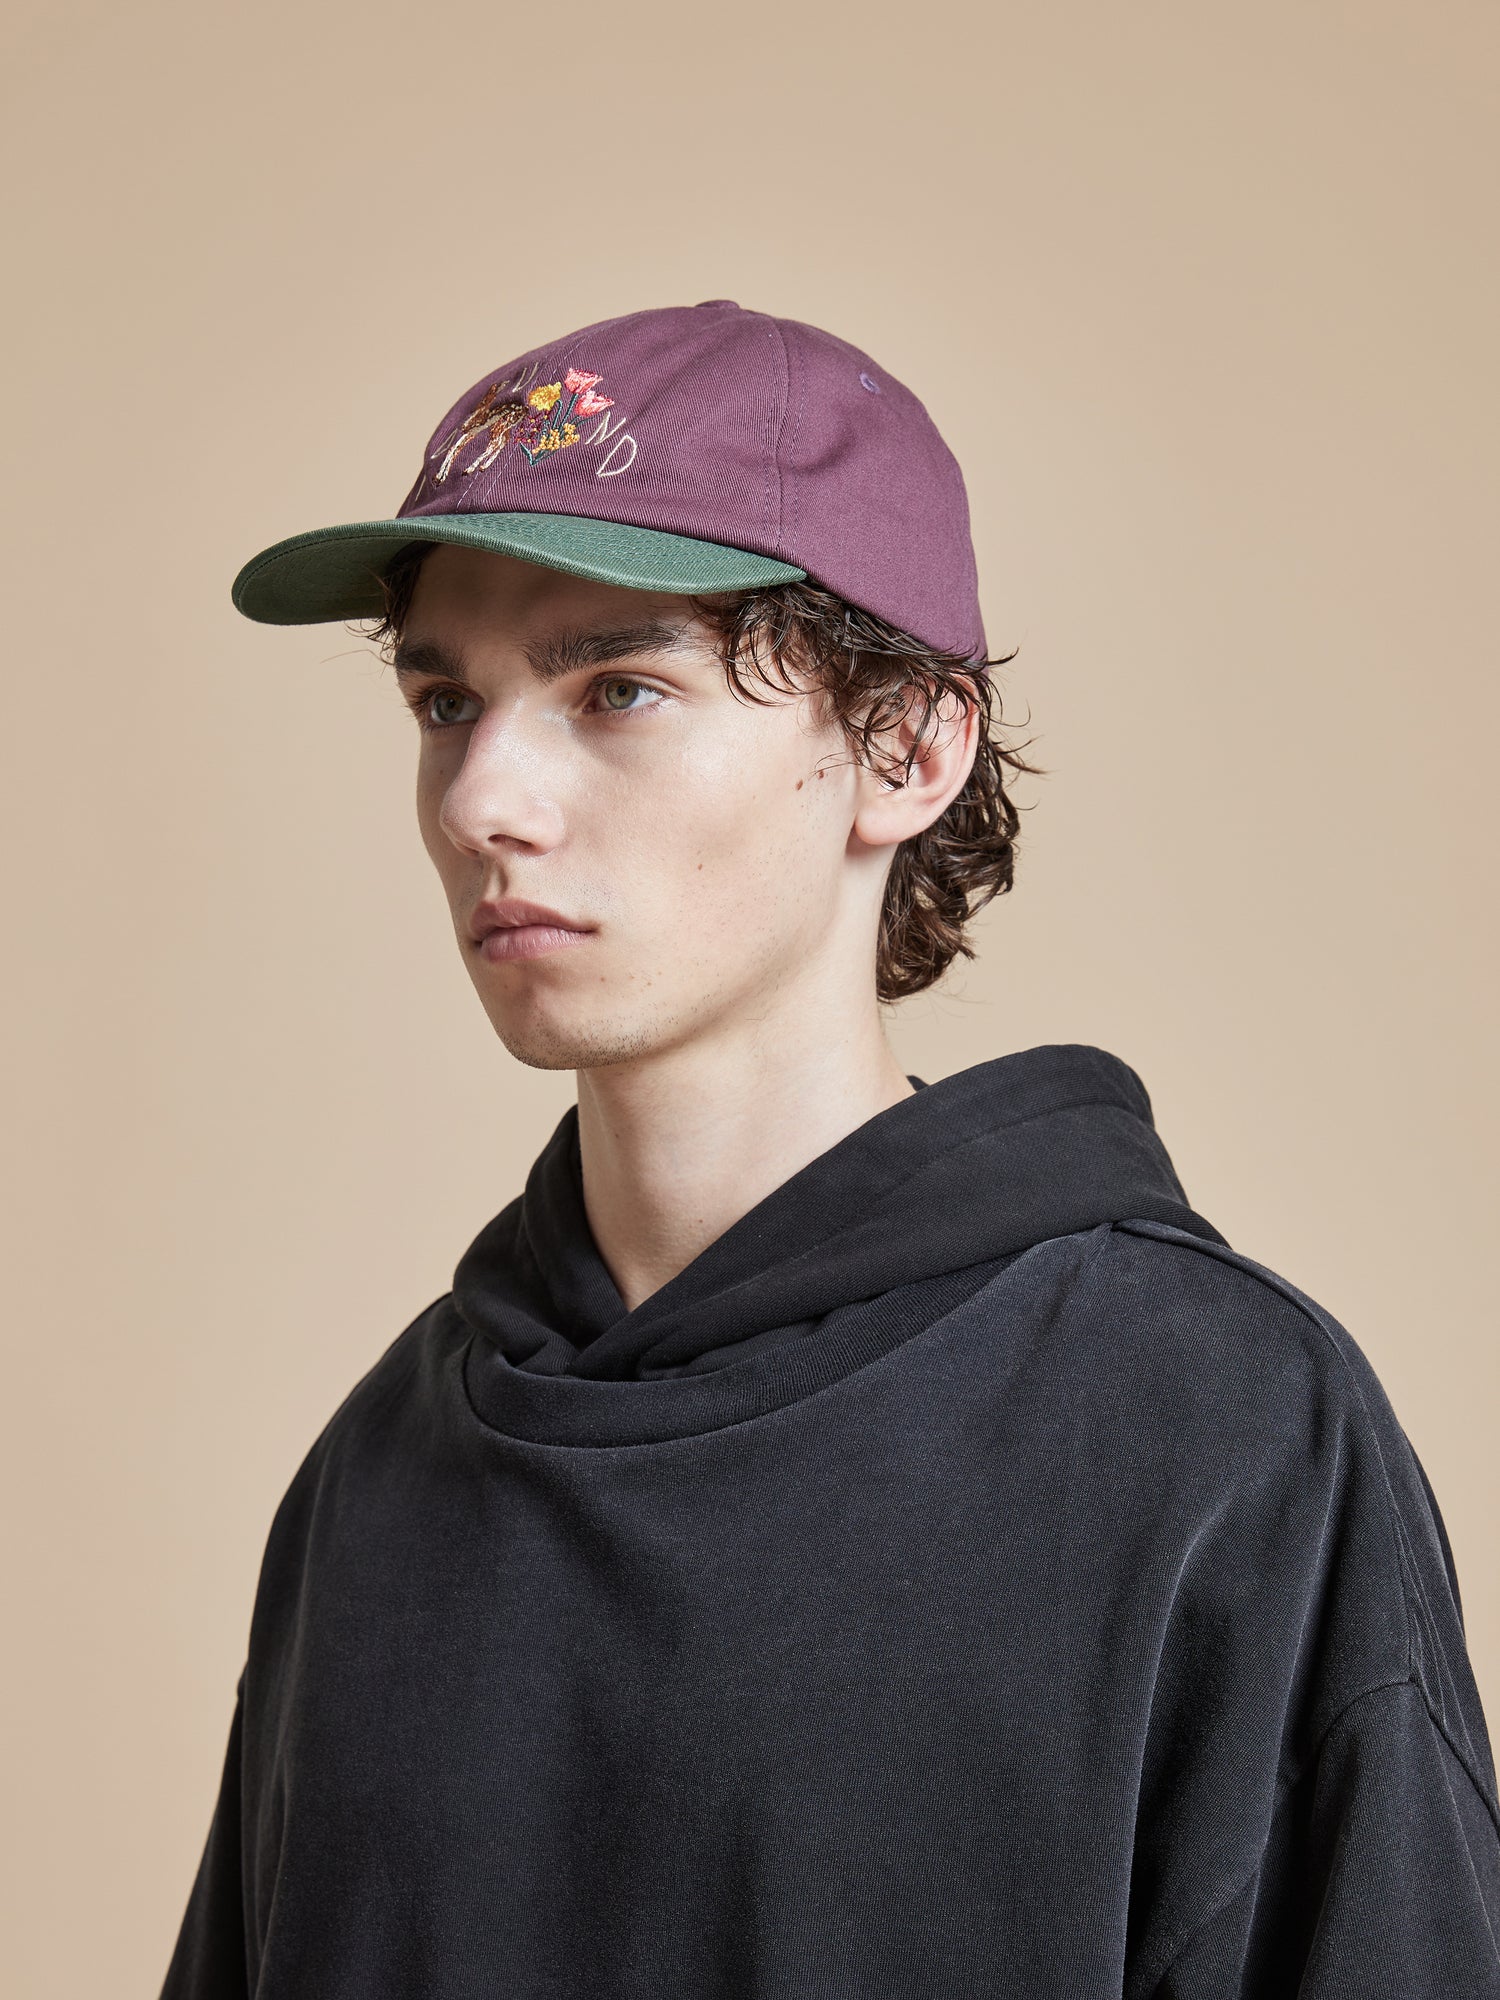 A young man wearing a black hoodie and a Found Flower Deer Cap.